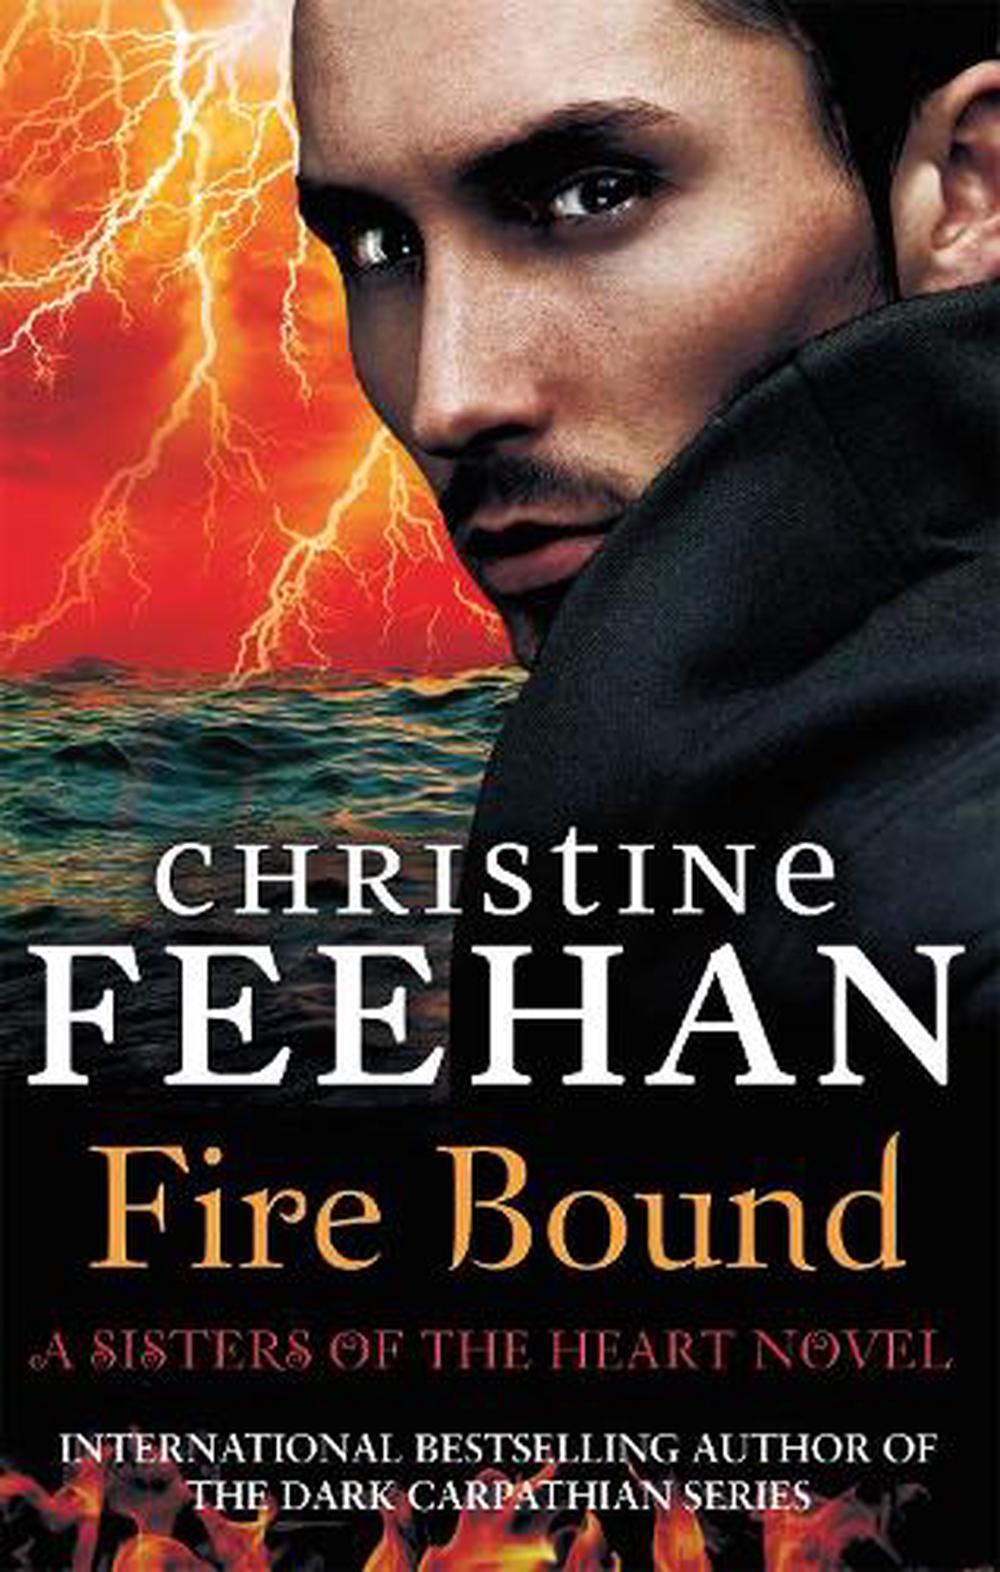 Fire Bound By Christine Feehan Paperback 9780349410326 Buy Online At The Nile